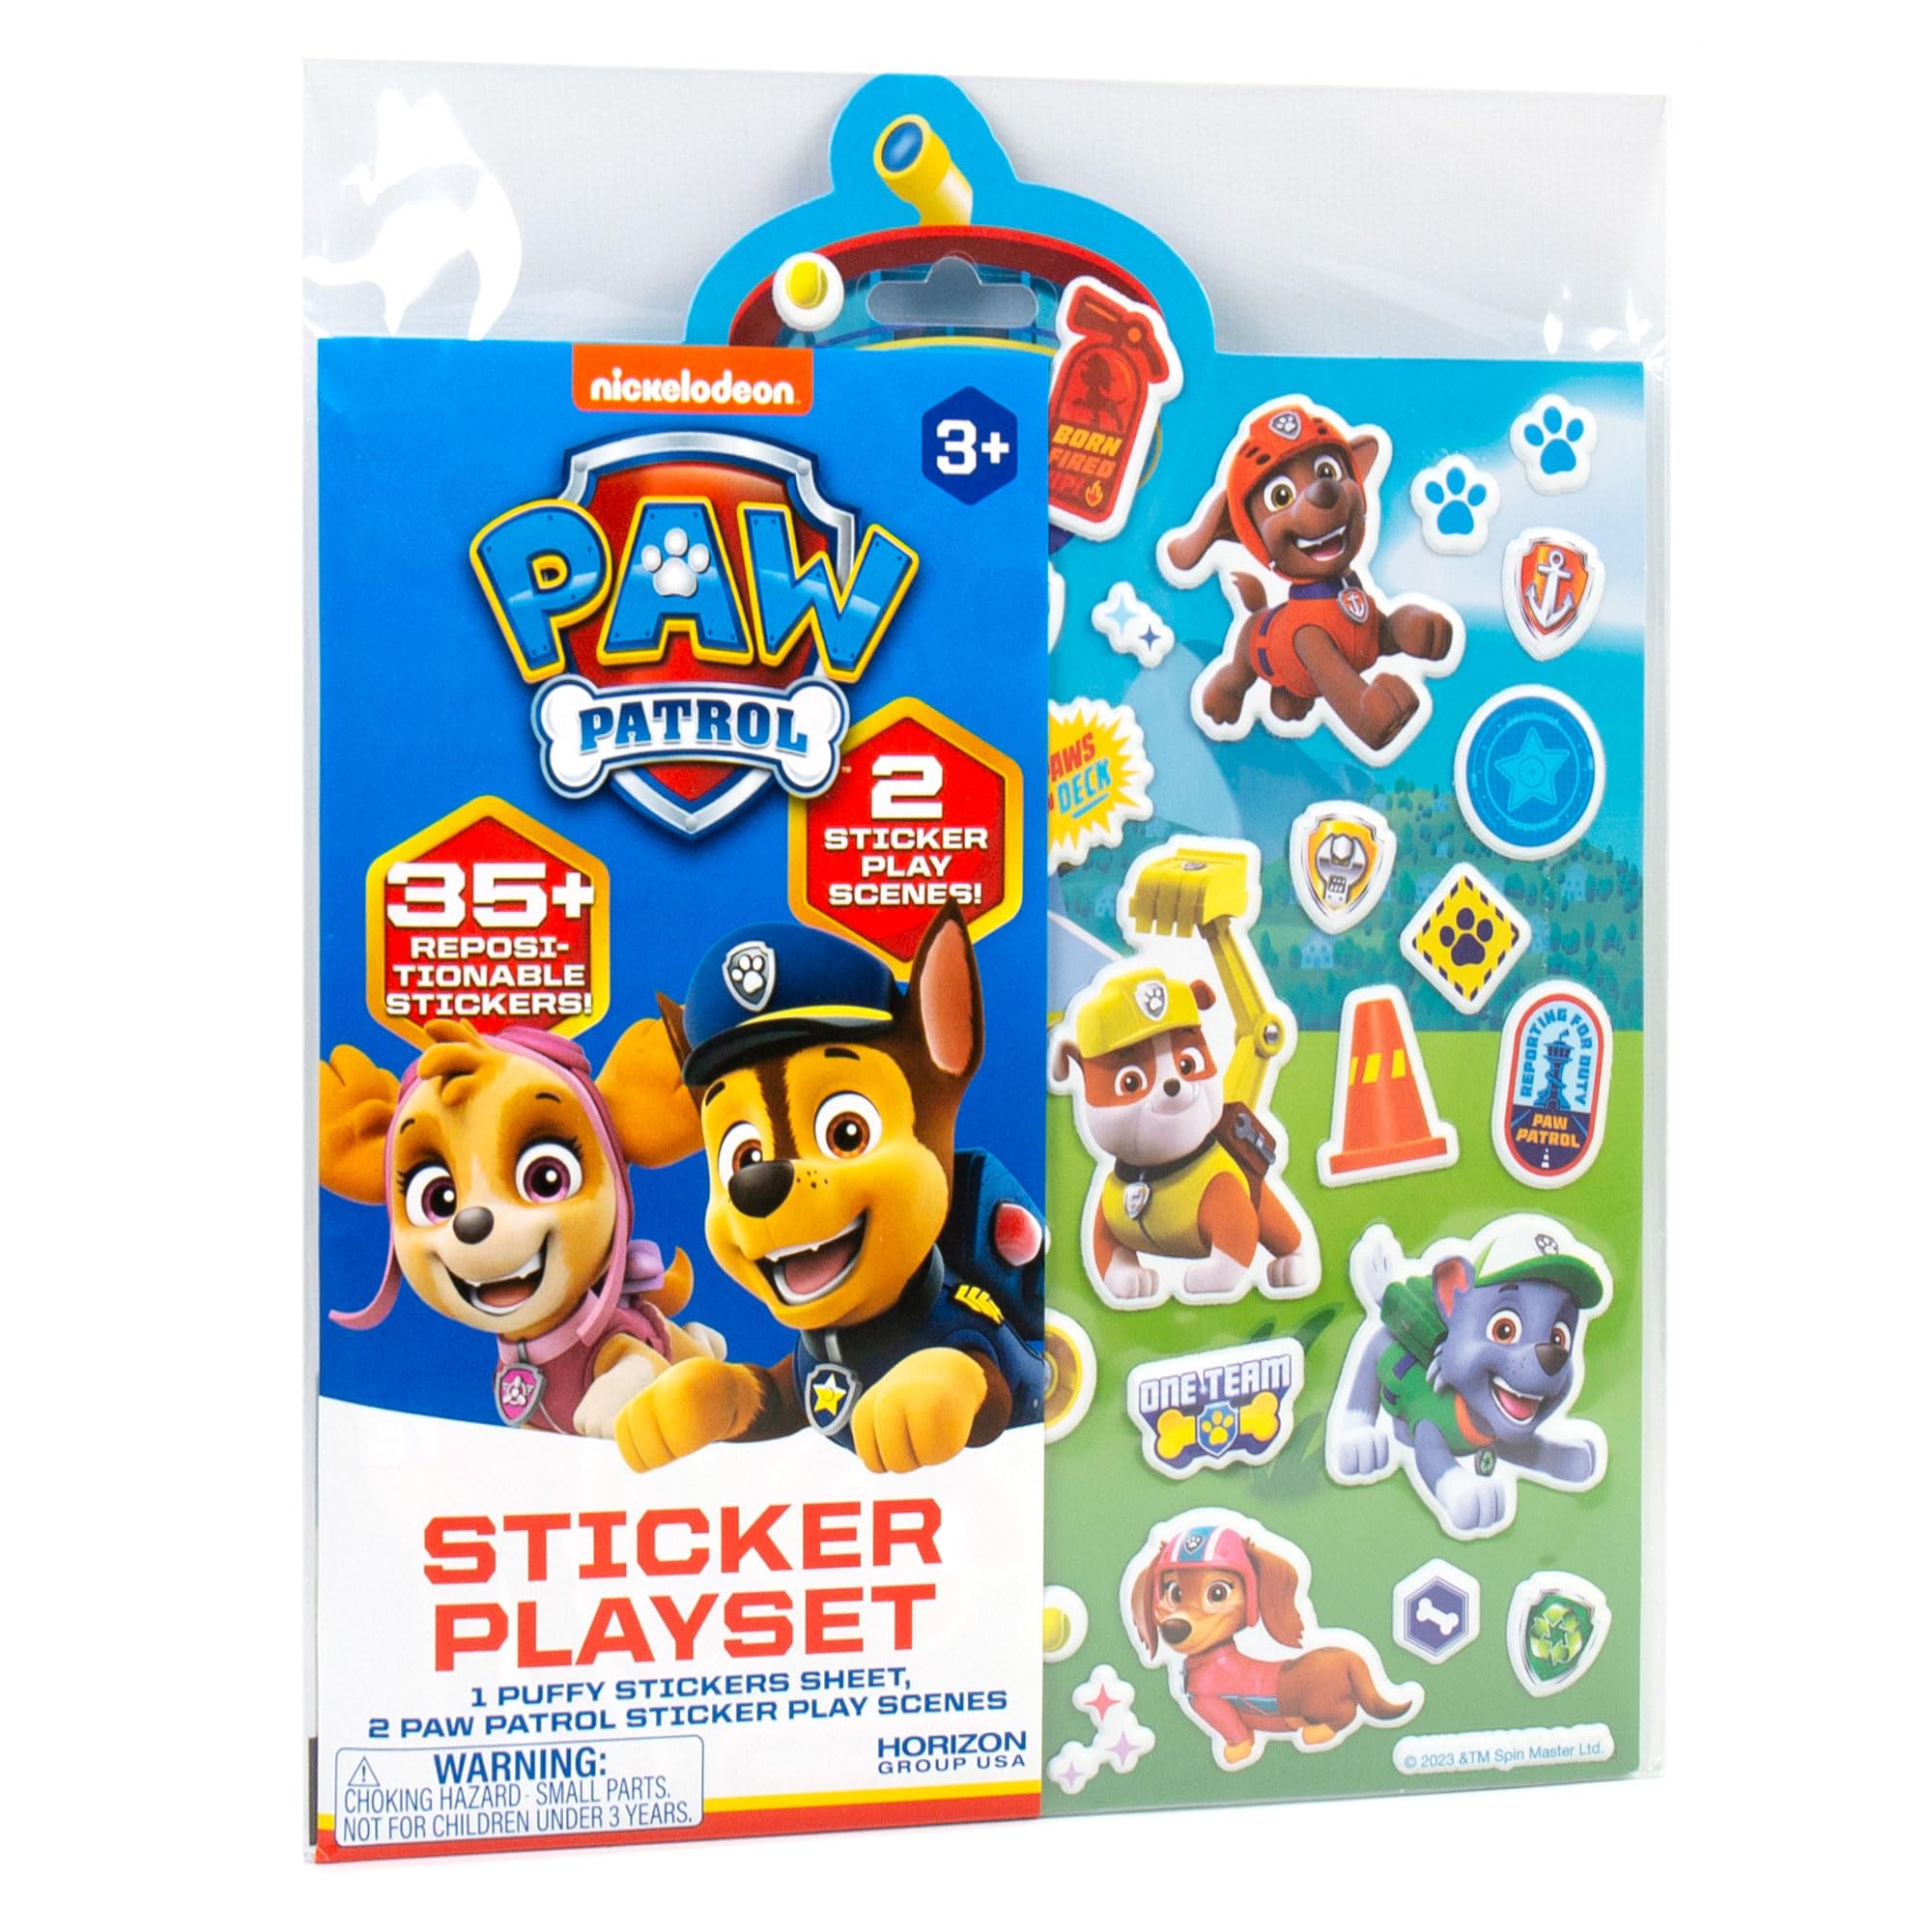 Paw Patrol Sticker Playset, Over 50 Repositionable Paw Patrol Stickers, 2 Sticker Play Scenes, Paw Patrol Party Activities, Paw Patrol Car Activity, Travel Activity for Kids & Toddlers